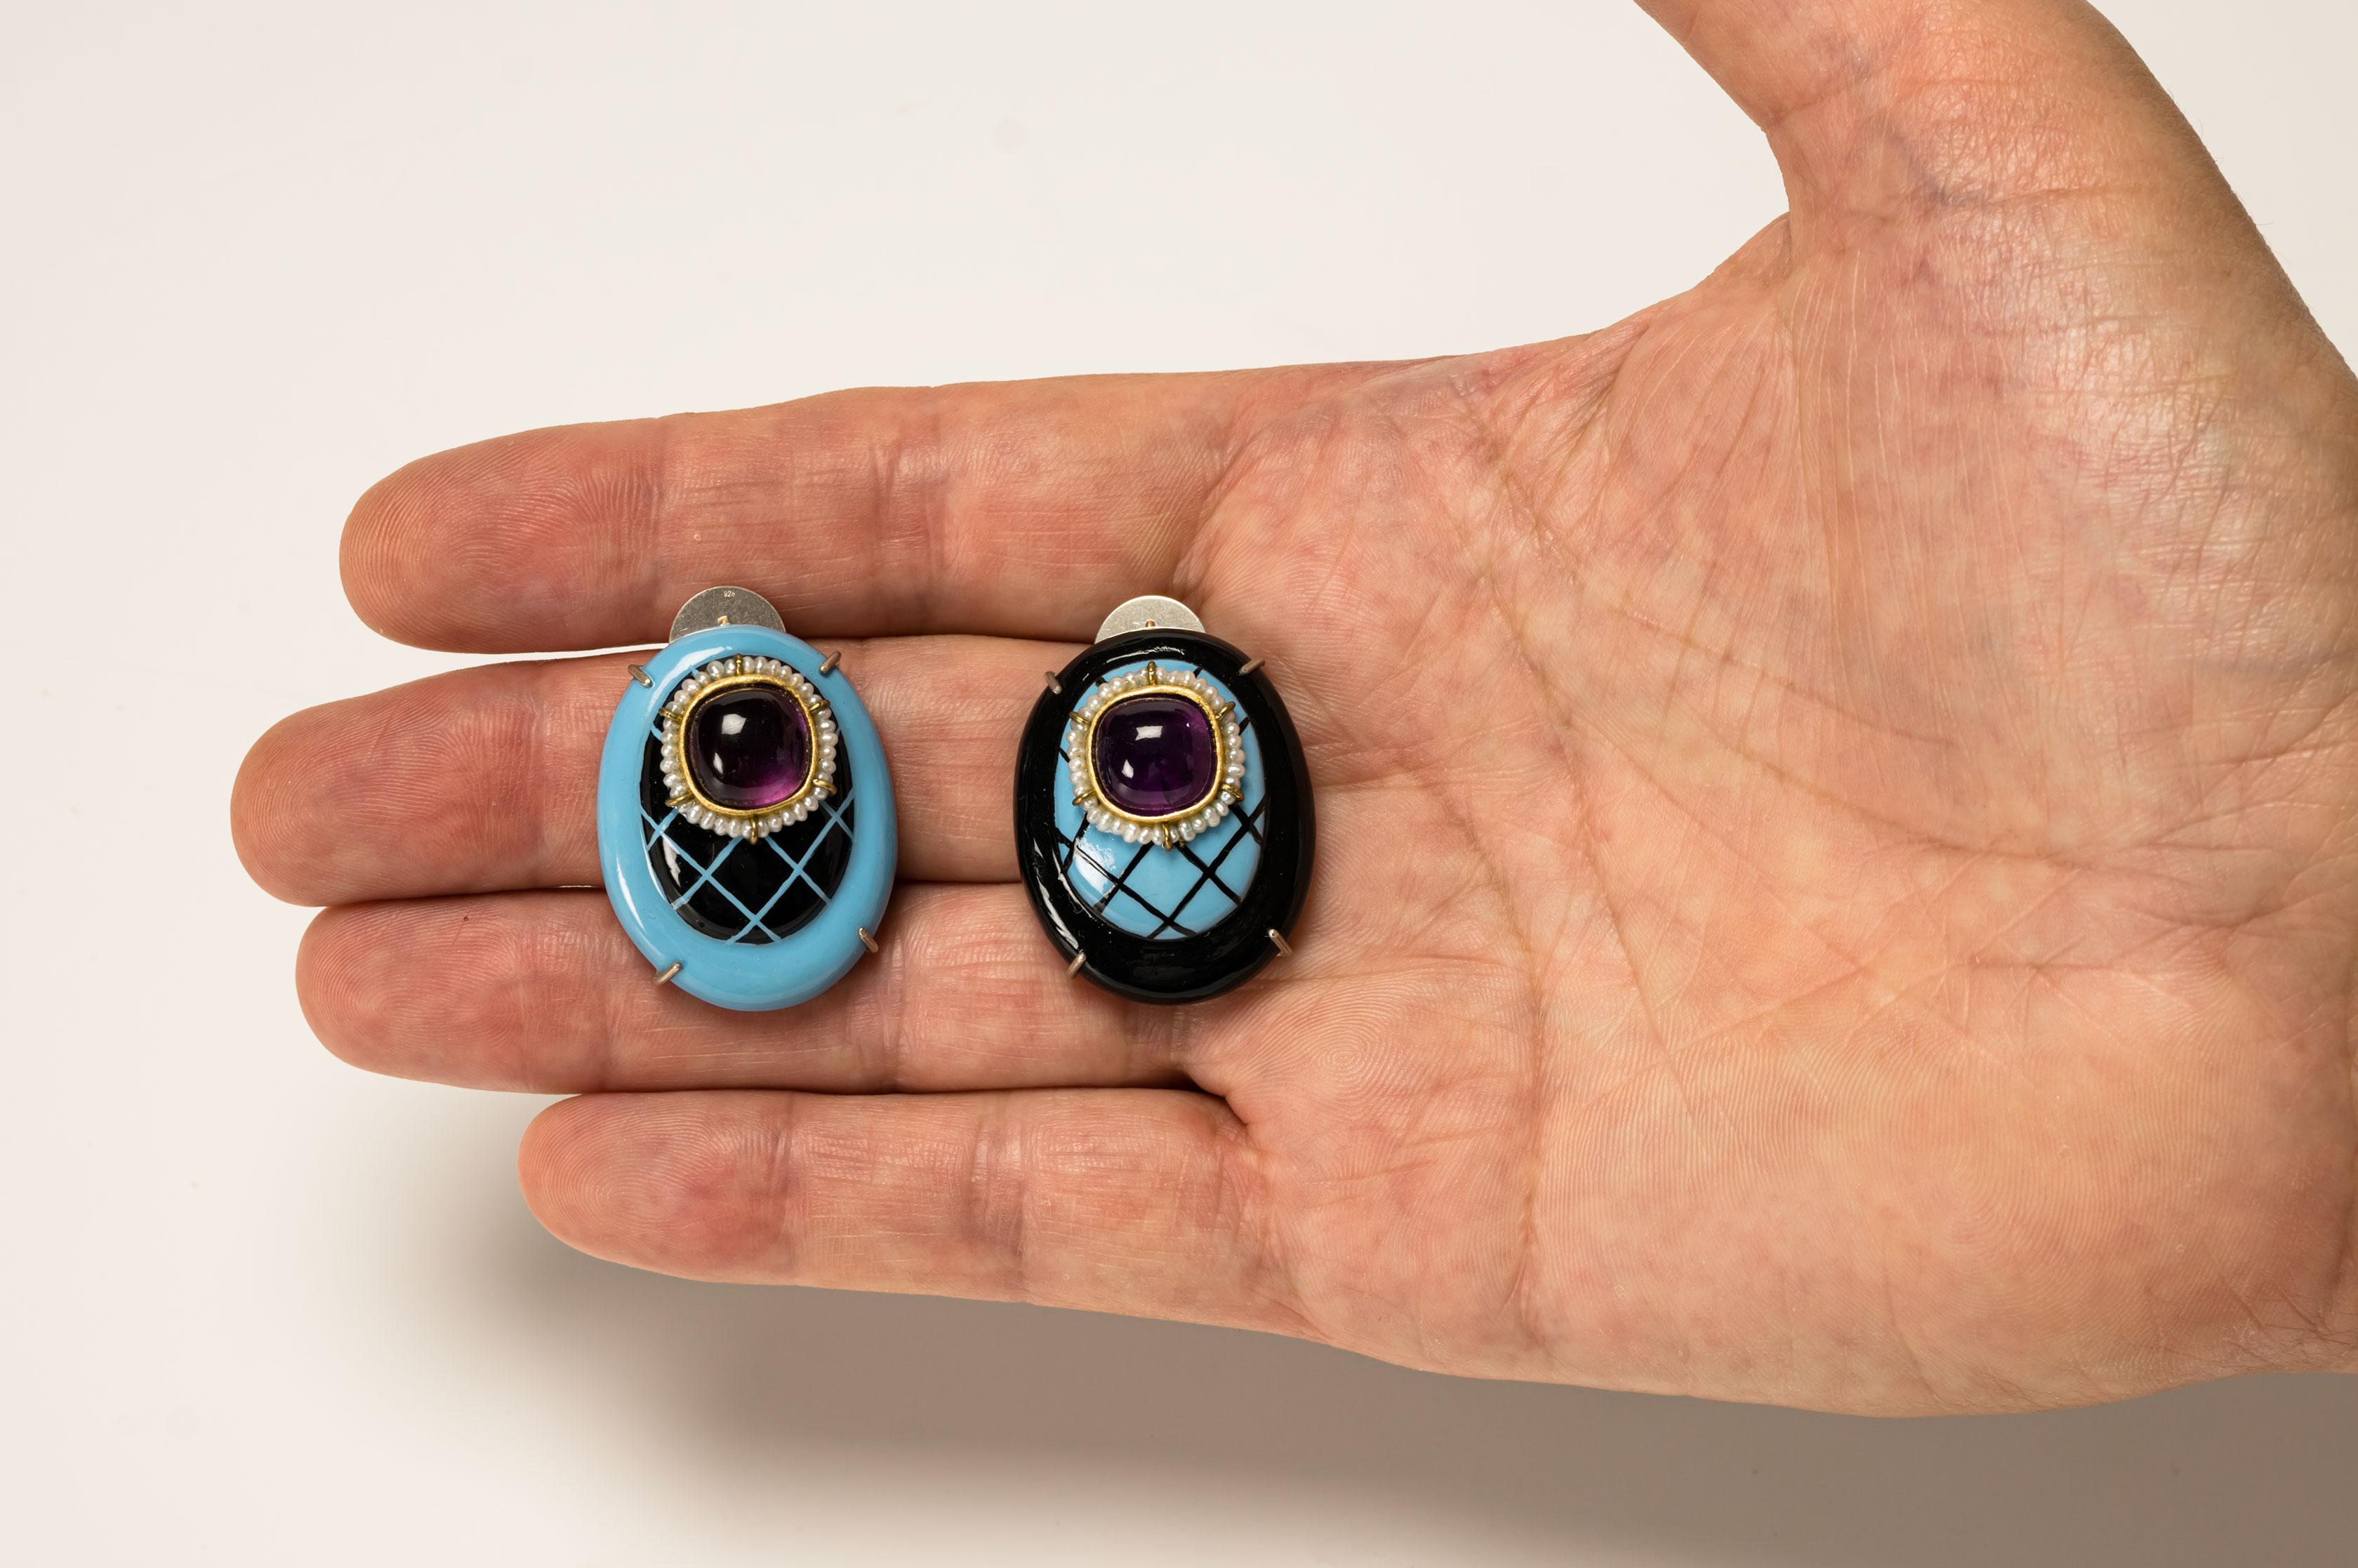 Earrings “Laetus”, 2021, are a limited edition contemporary author jewelry by italian artist Gian Luca Bartellone.
Materials: papier-mâché, gold 18kt, silver, amethysts, pearls, gold leaf 22kt. (new)

The main body is made of papier-mâché and hand